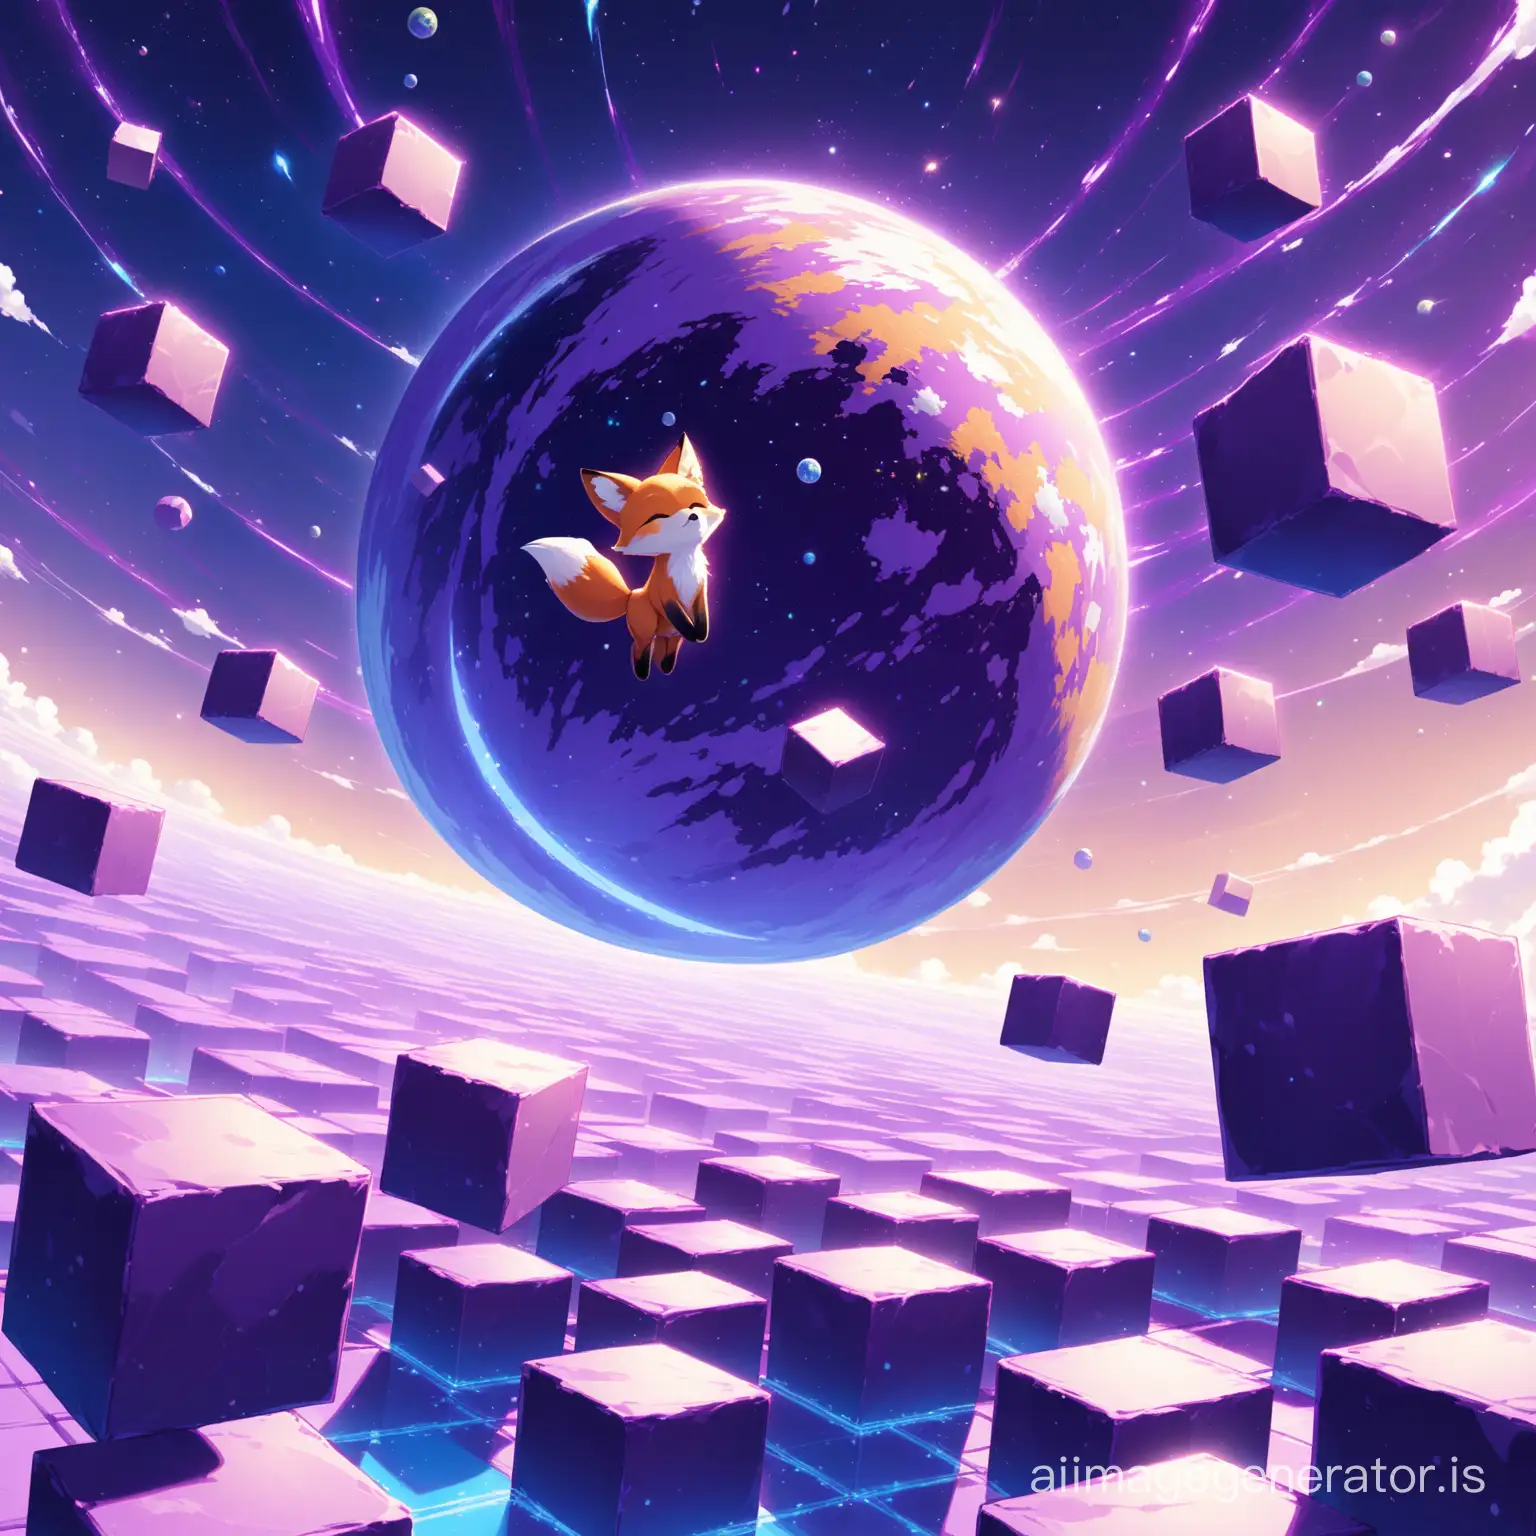 Cute-Fox-Flying-on-Purple-Block-Earth-Detailed-and-High-Quality-Art